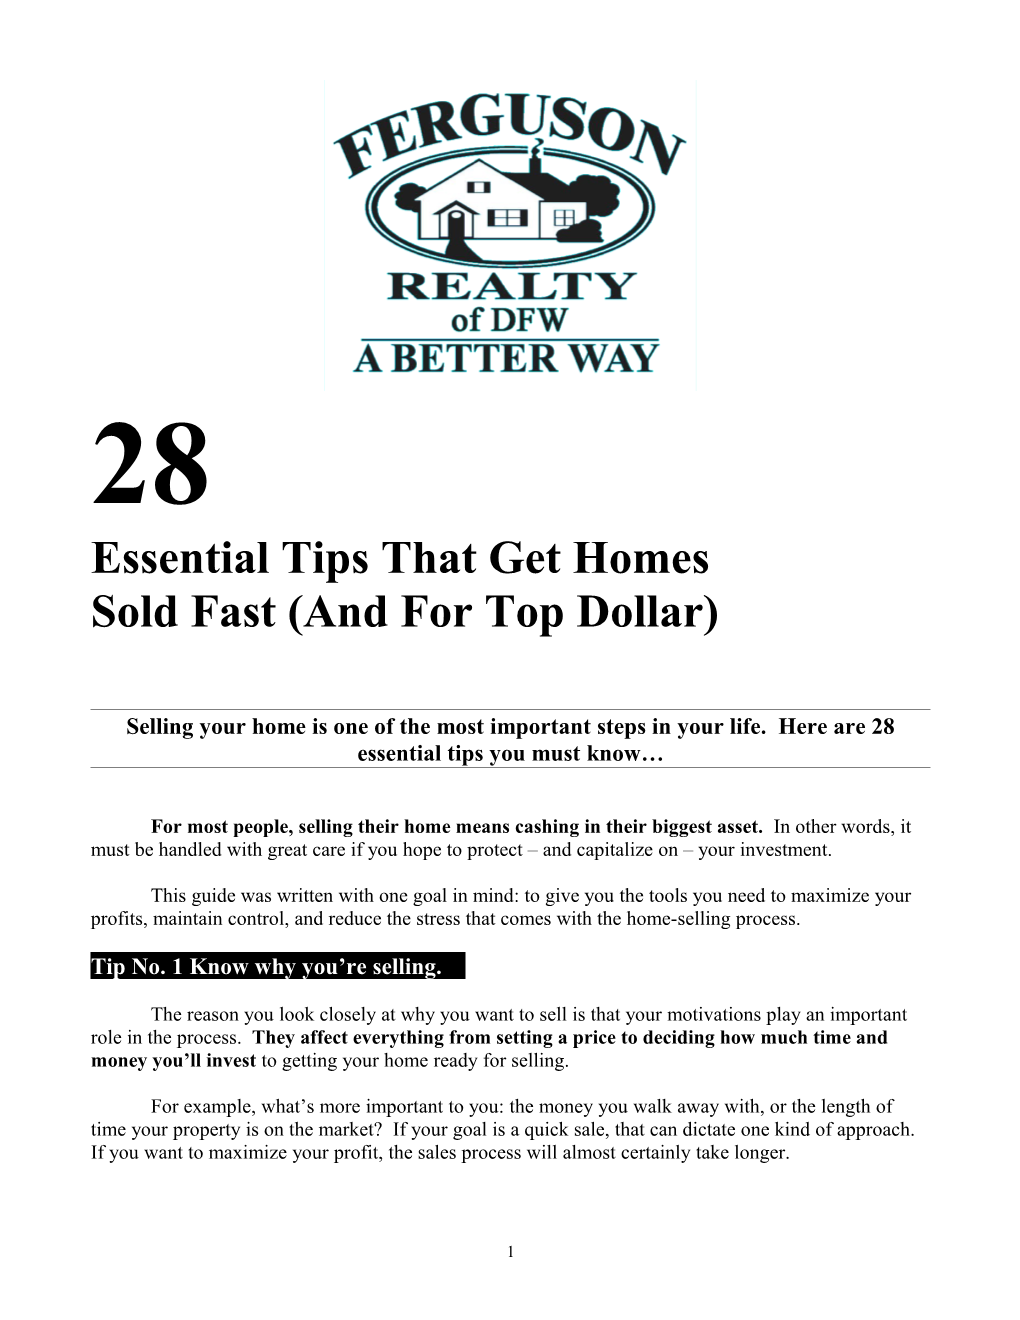 Essential Tips That Get Homes